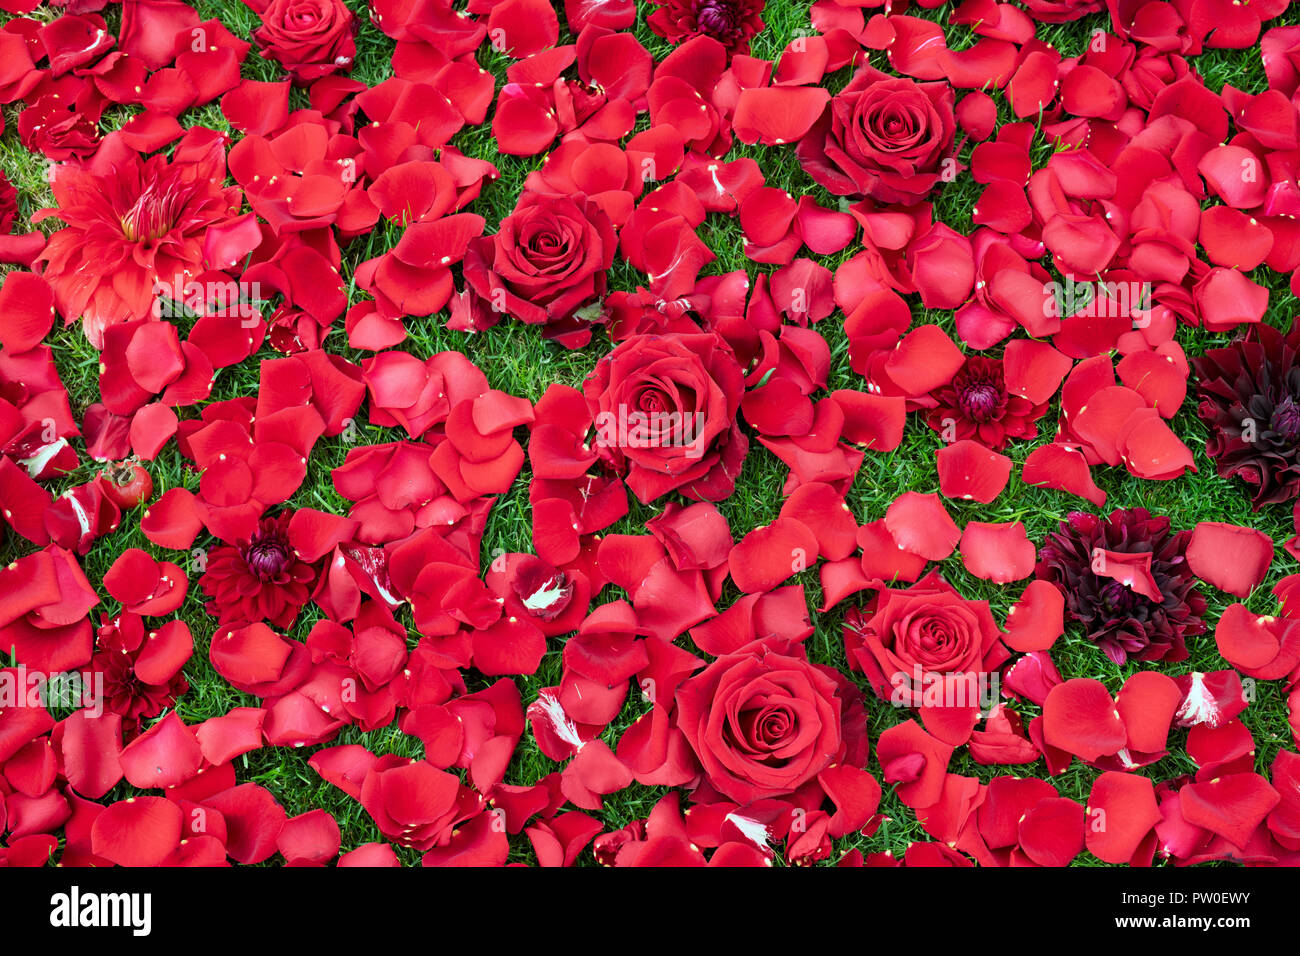 Scattered Red Roses Petals On White Stock Photo 135954065